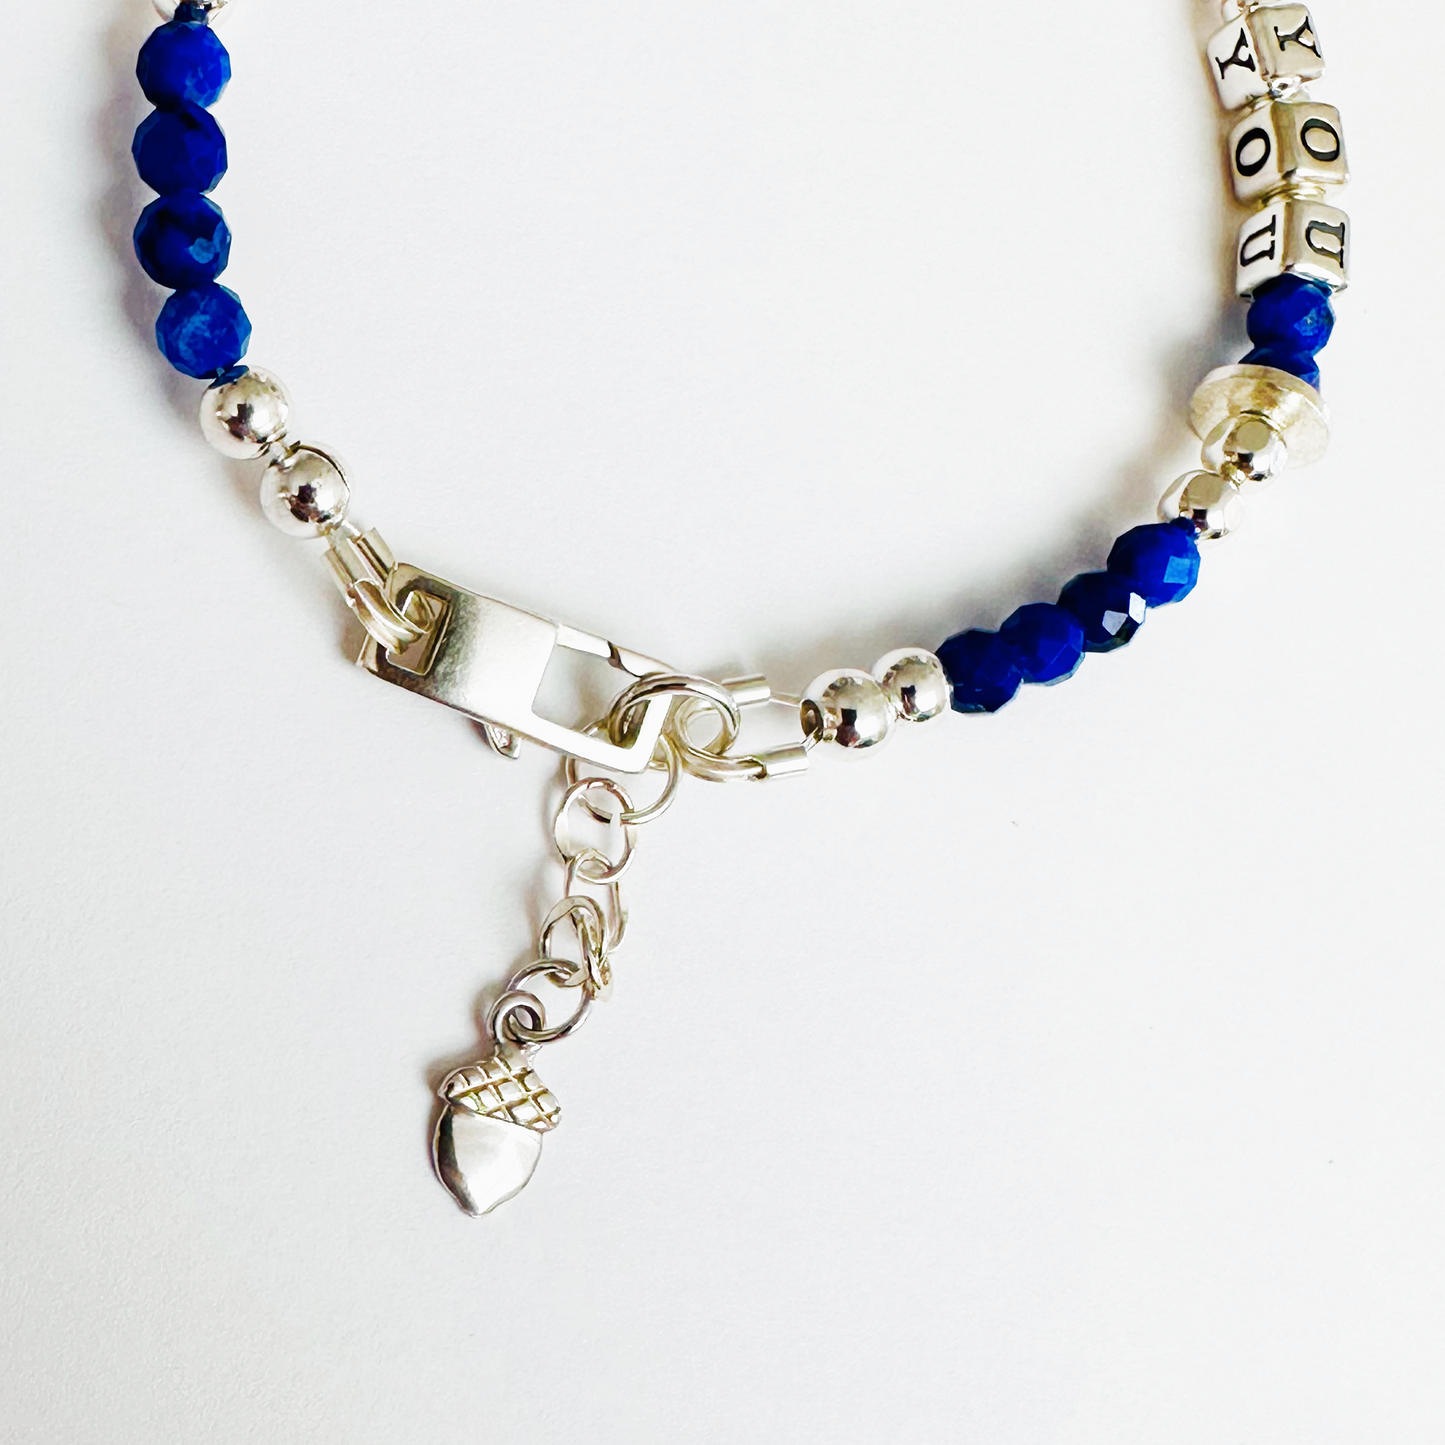 Be True, Be You Sterling Silver Bracelet with blue lapis lazuli gemstones, showing close-up of  acorn charm